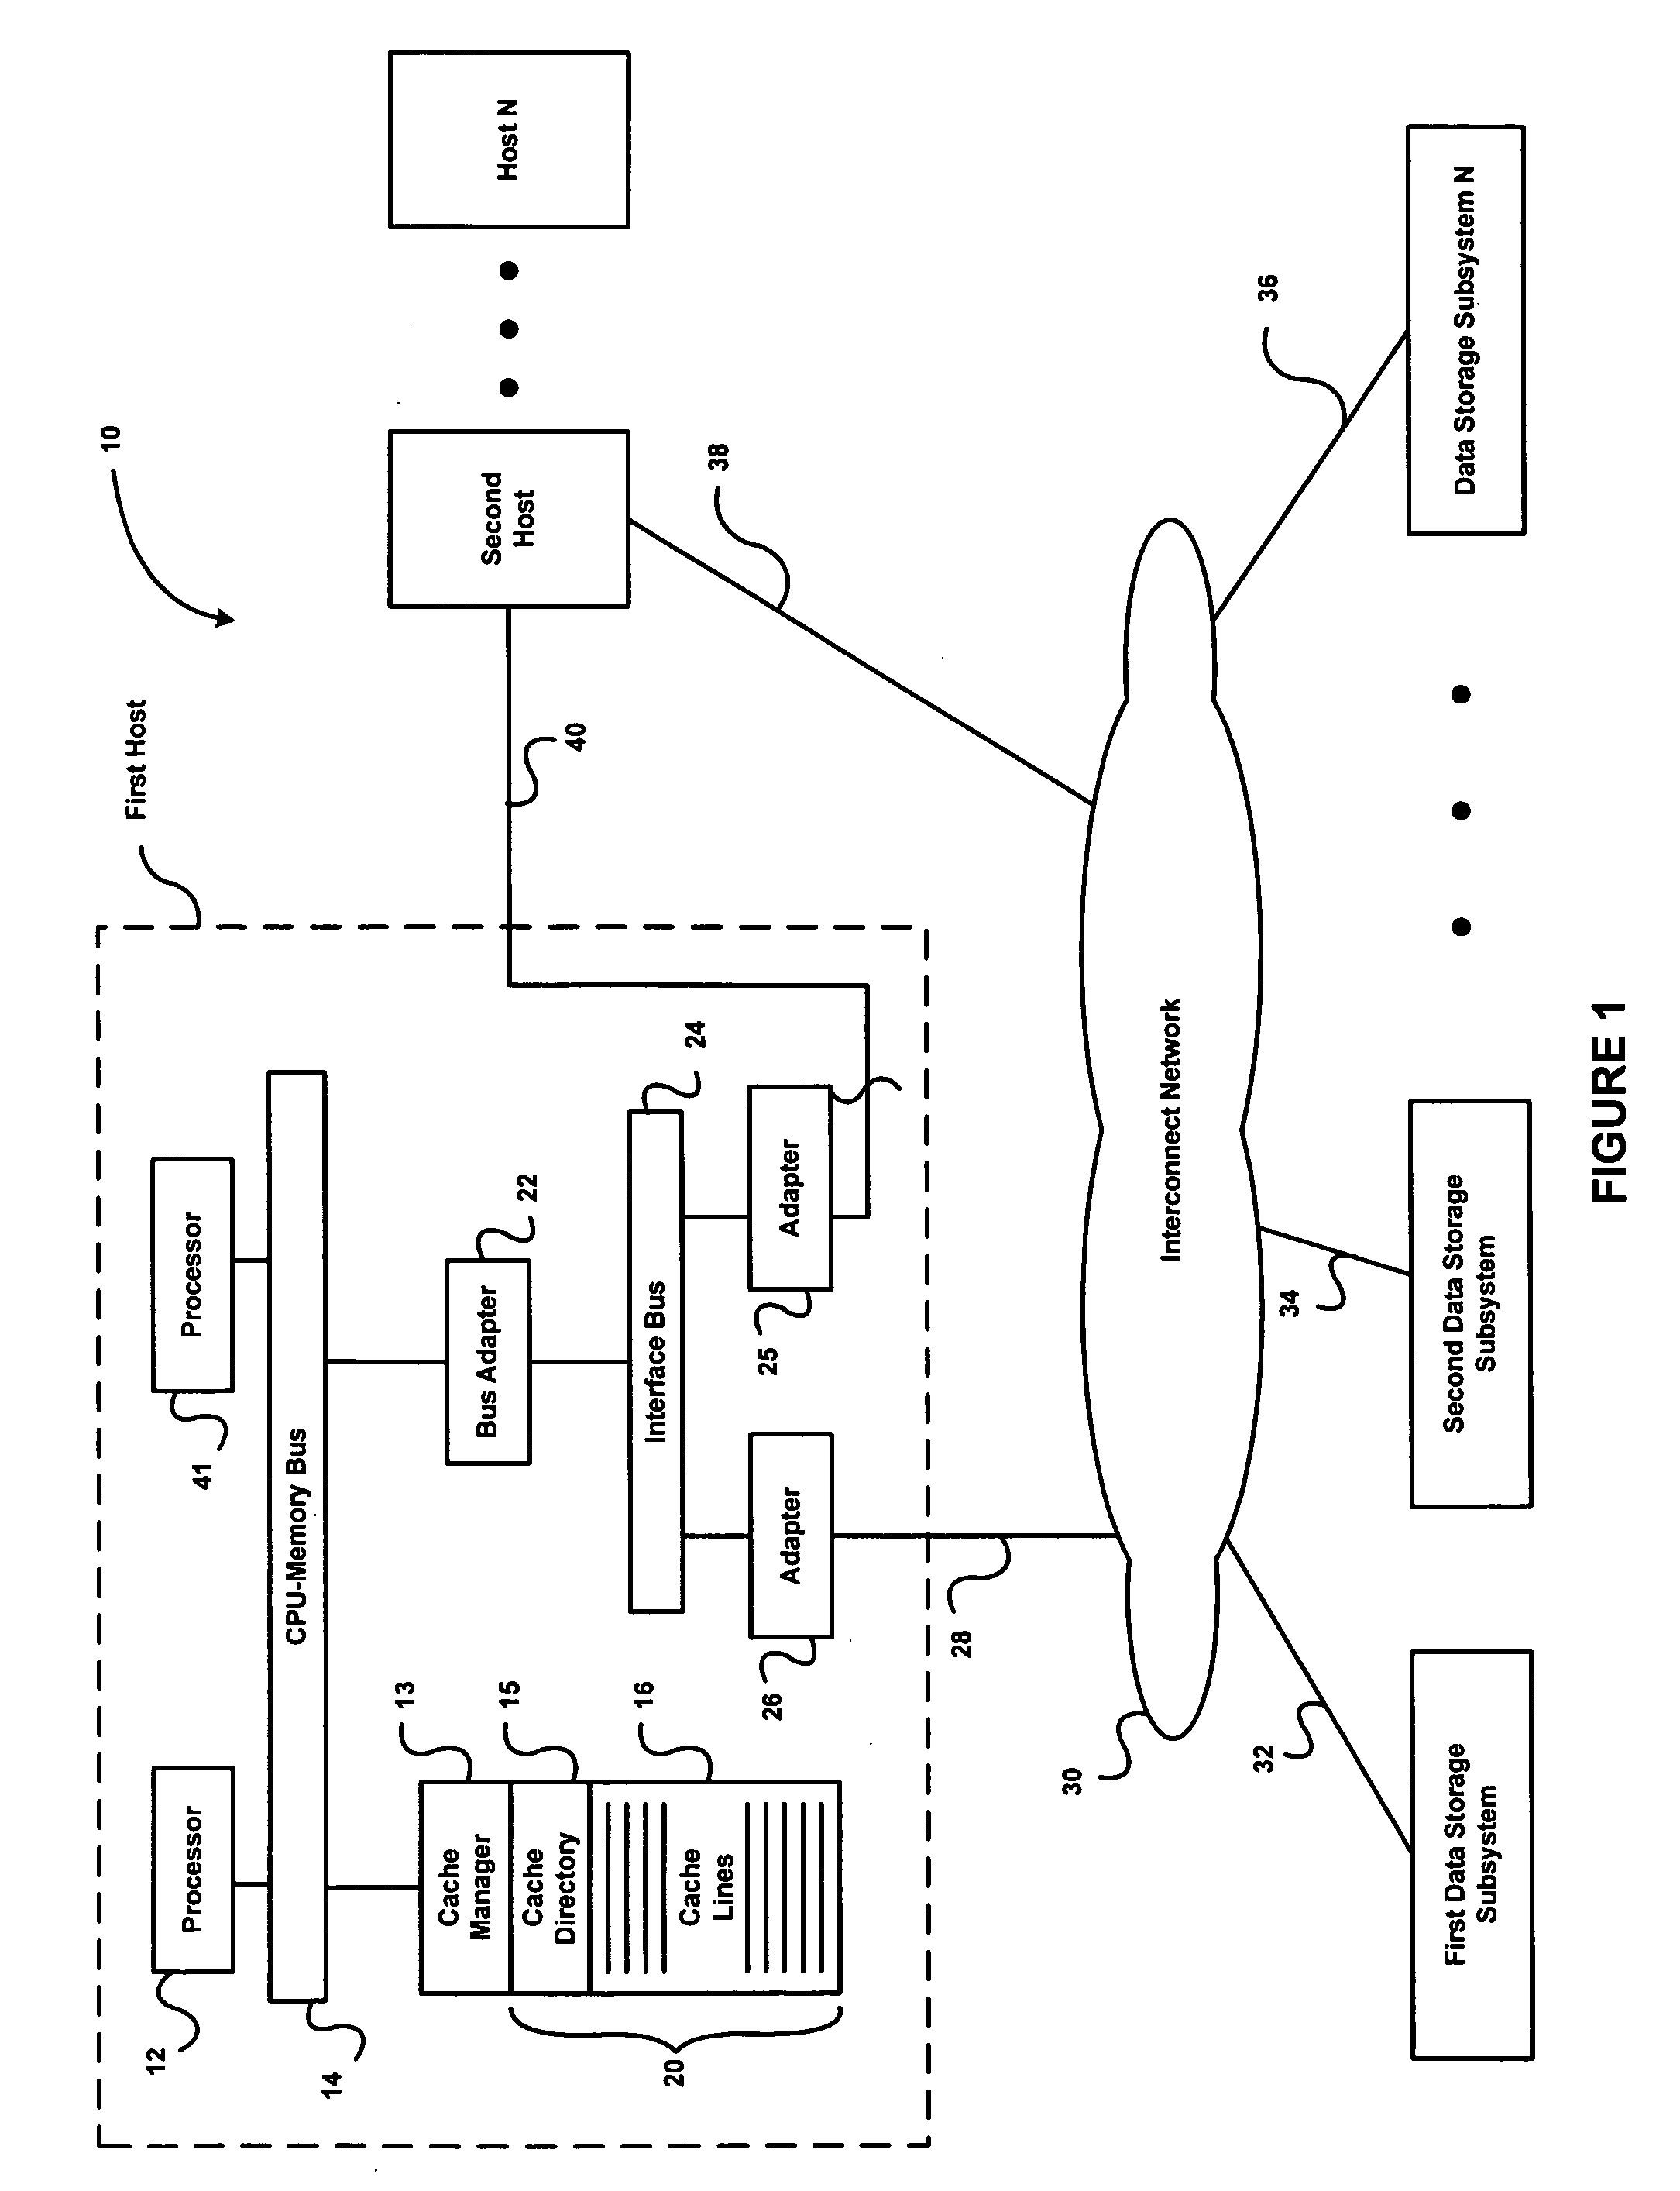 Methods of determining and searching for modified blocks in a file system